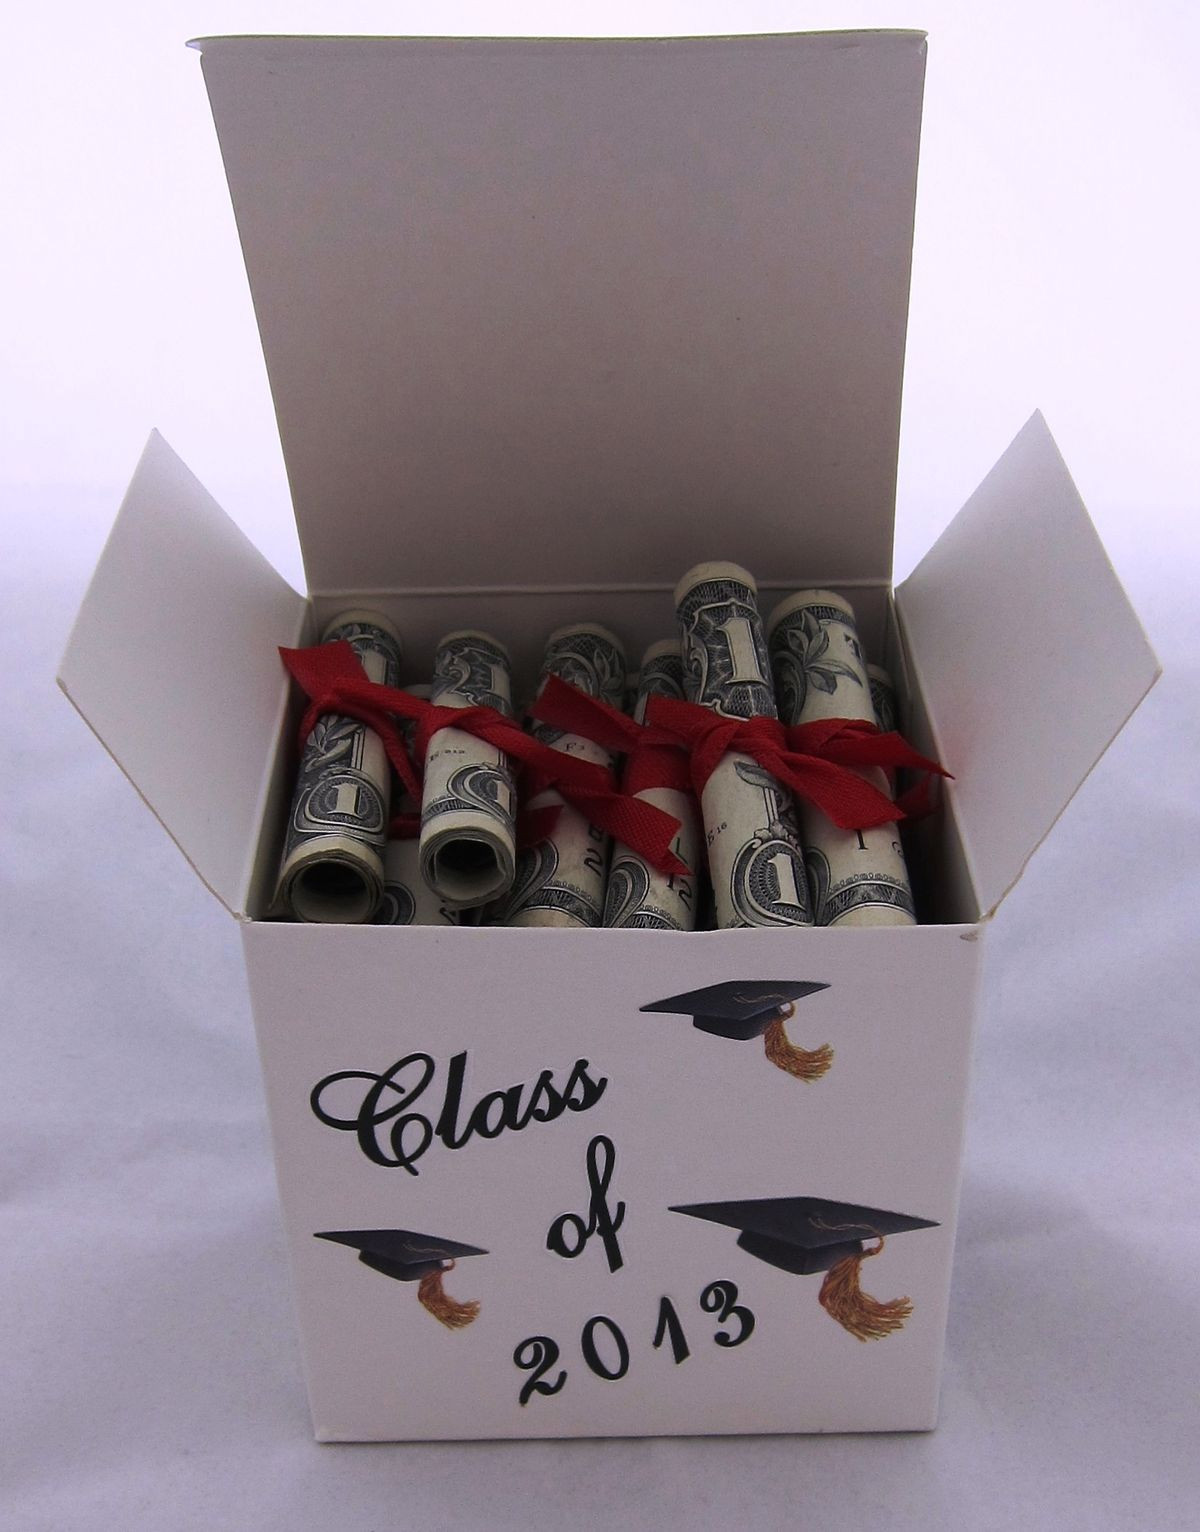 Great Graduation Gift Ideas
 How Punny Are These 5 Crafty Ways to Give Cash Gifts